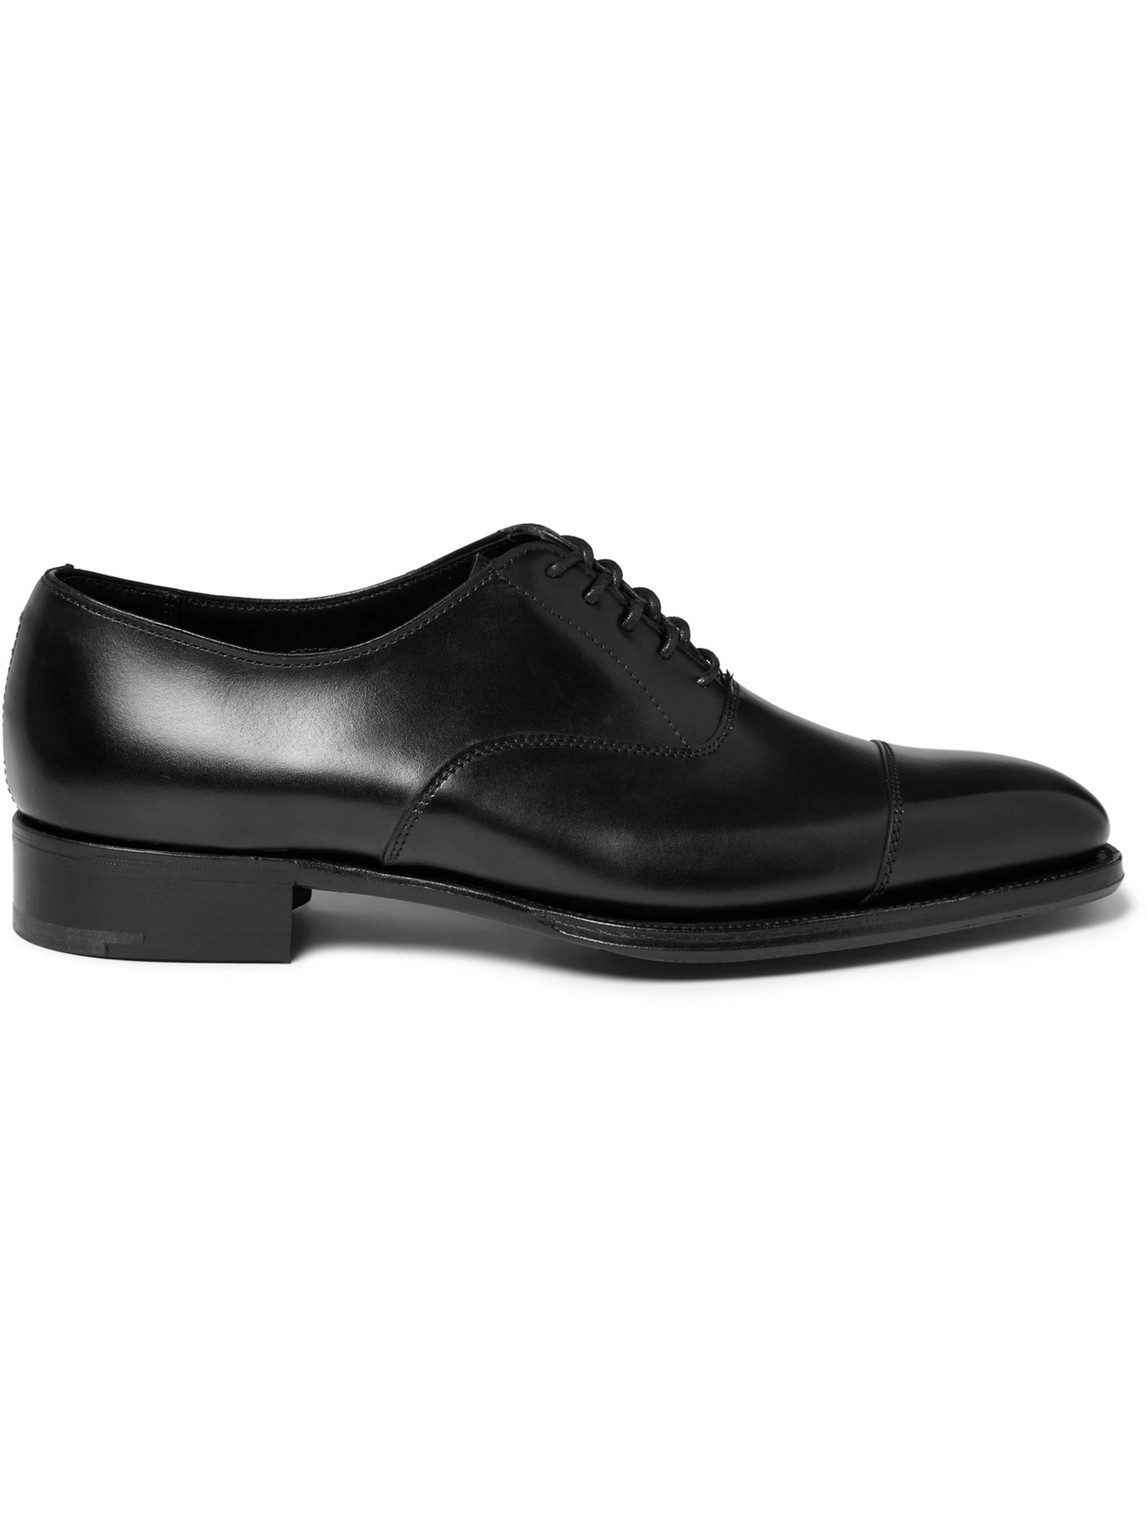 George Cleverley Leather Oxford Shoes